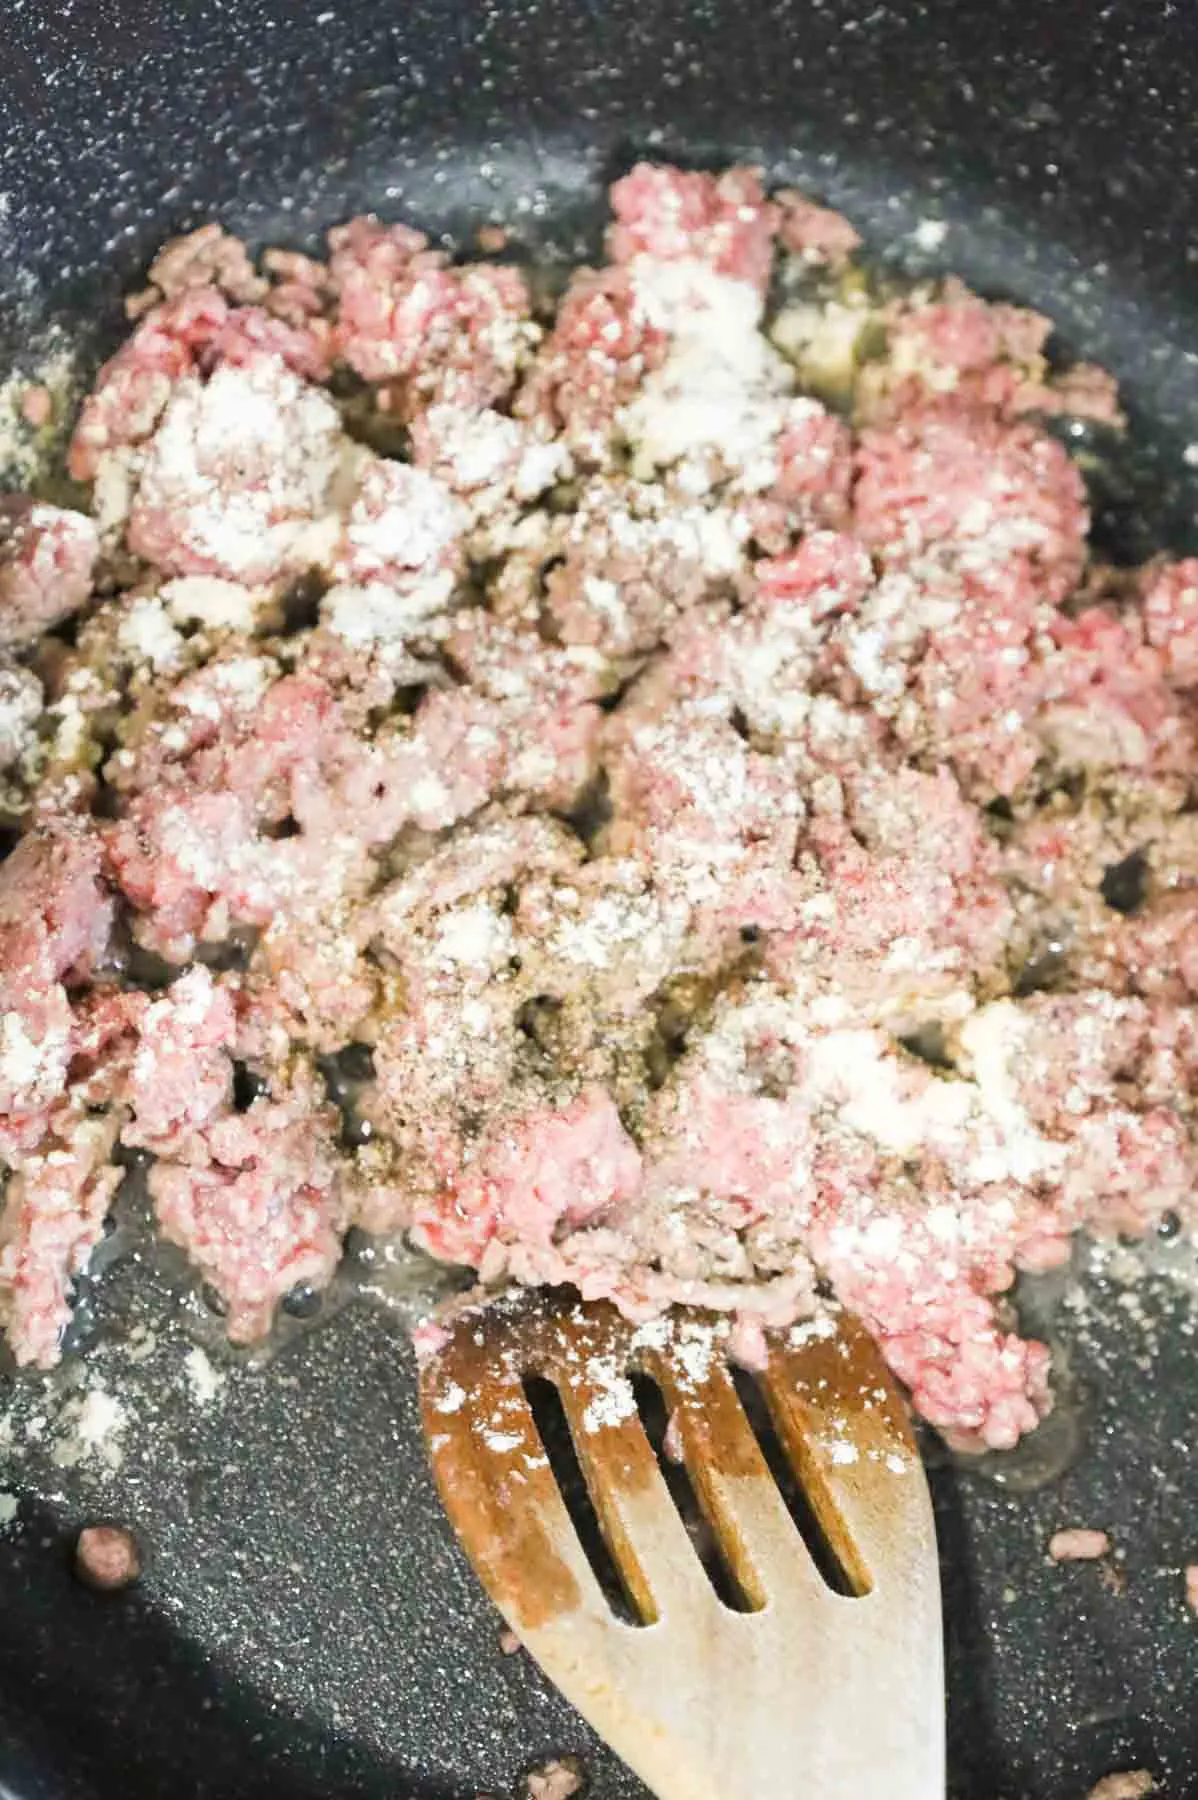 salt, pepper, garlic powder and onion powder added to ground beef cooking in a skillet